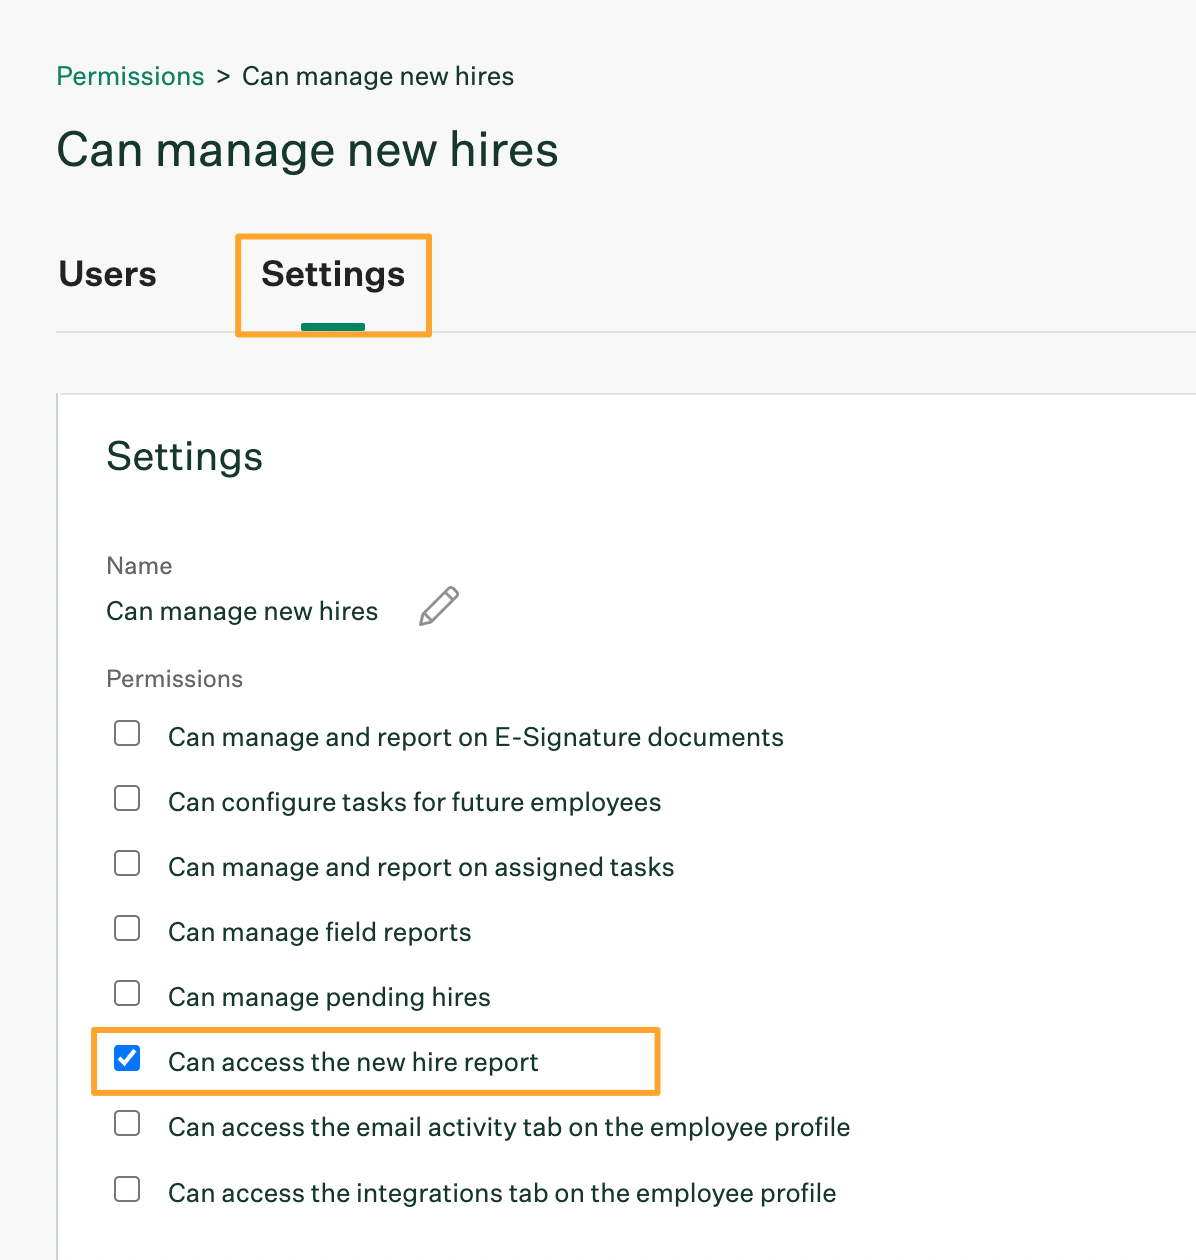 Can access the new hire report permission enabled in custom access role settings